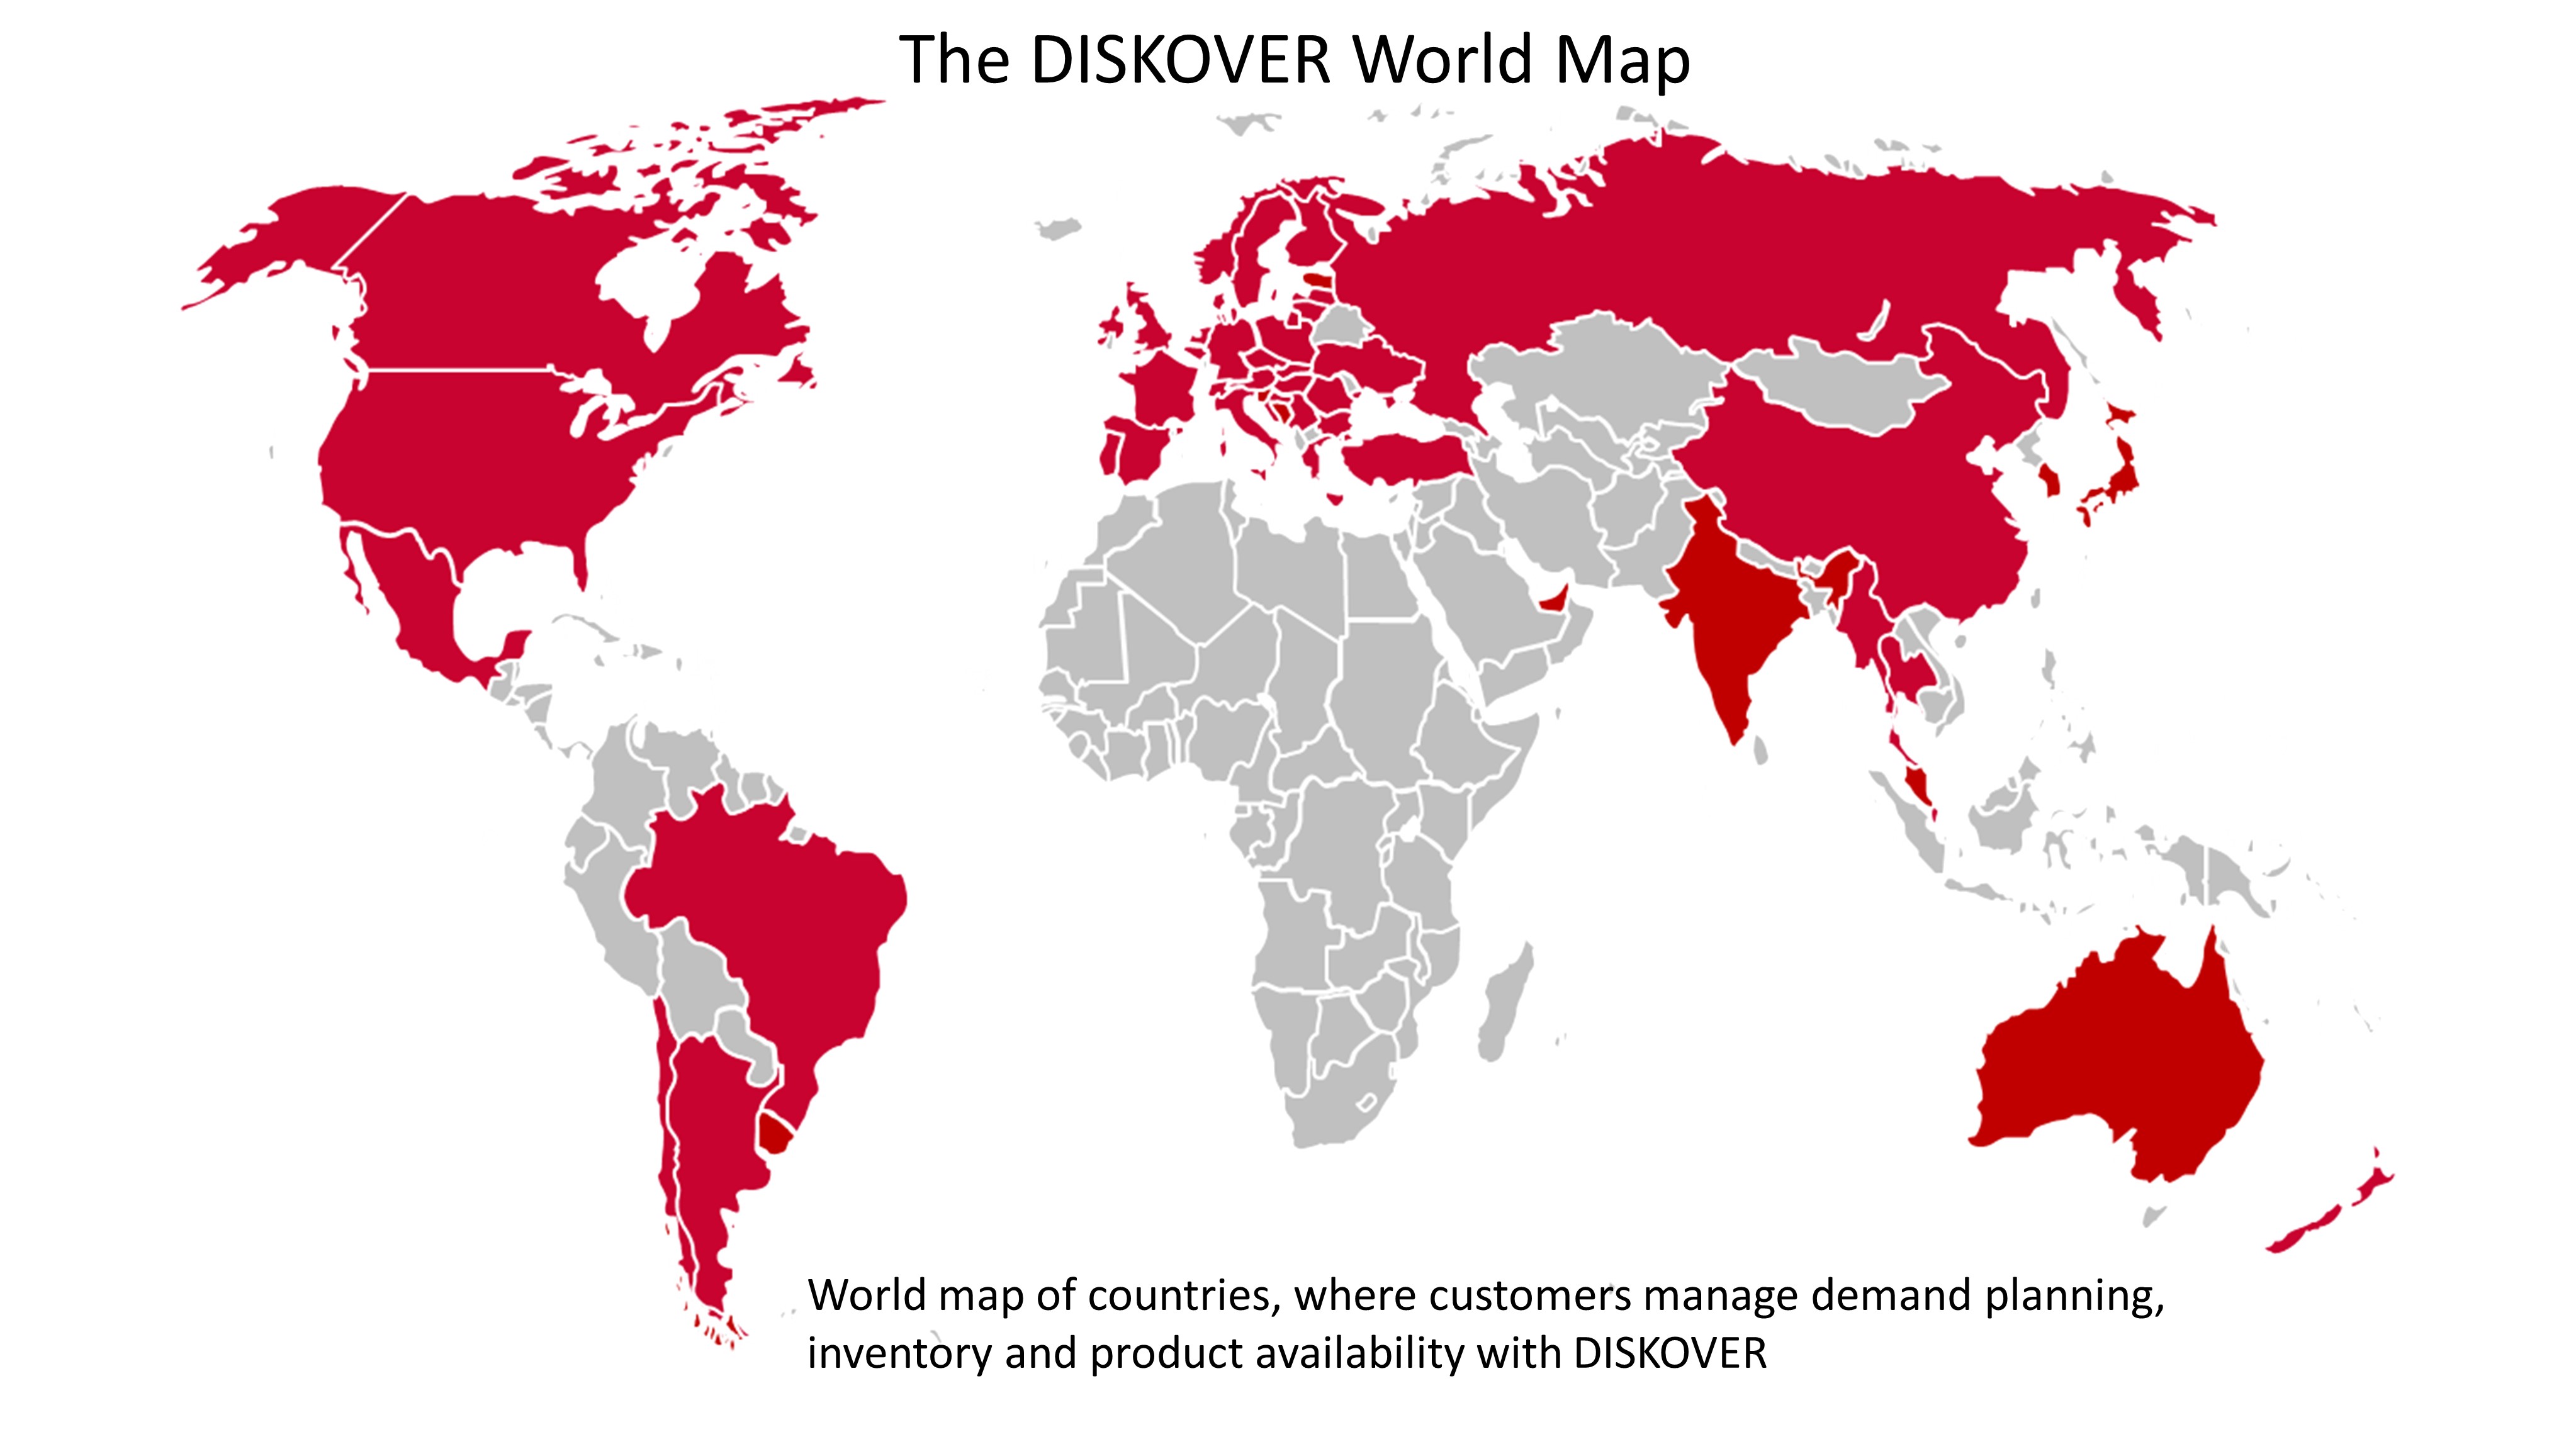 DISKOVER is use world wide 